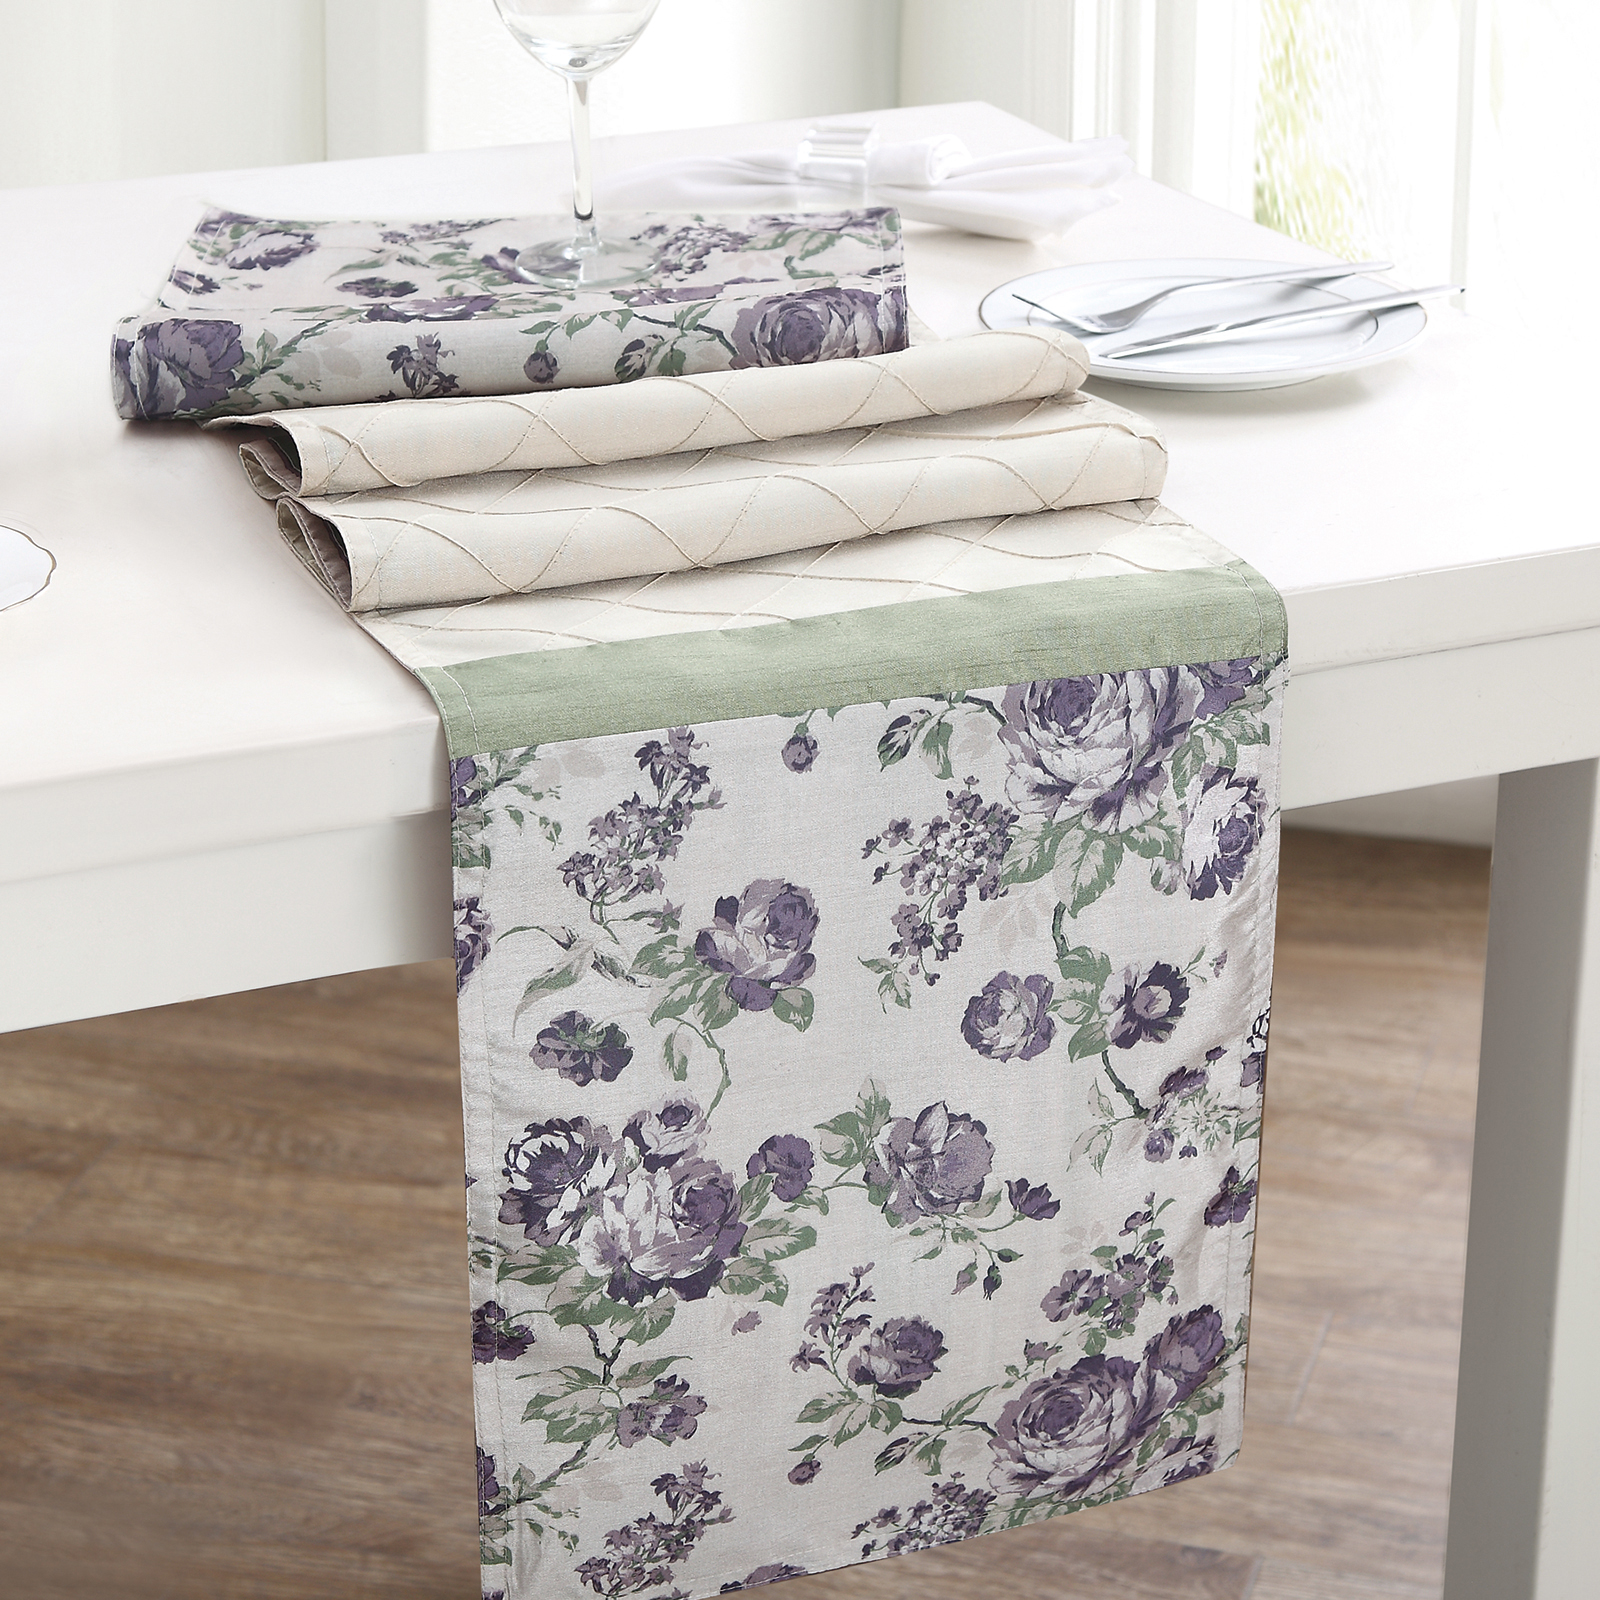 VCNY Home Chelsea Floral Printed Runner